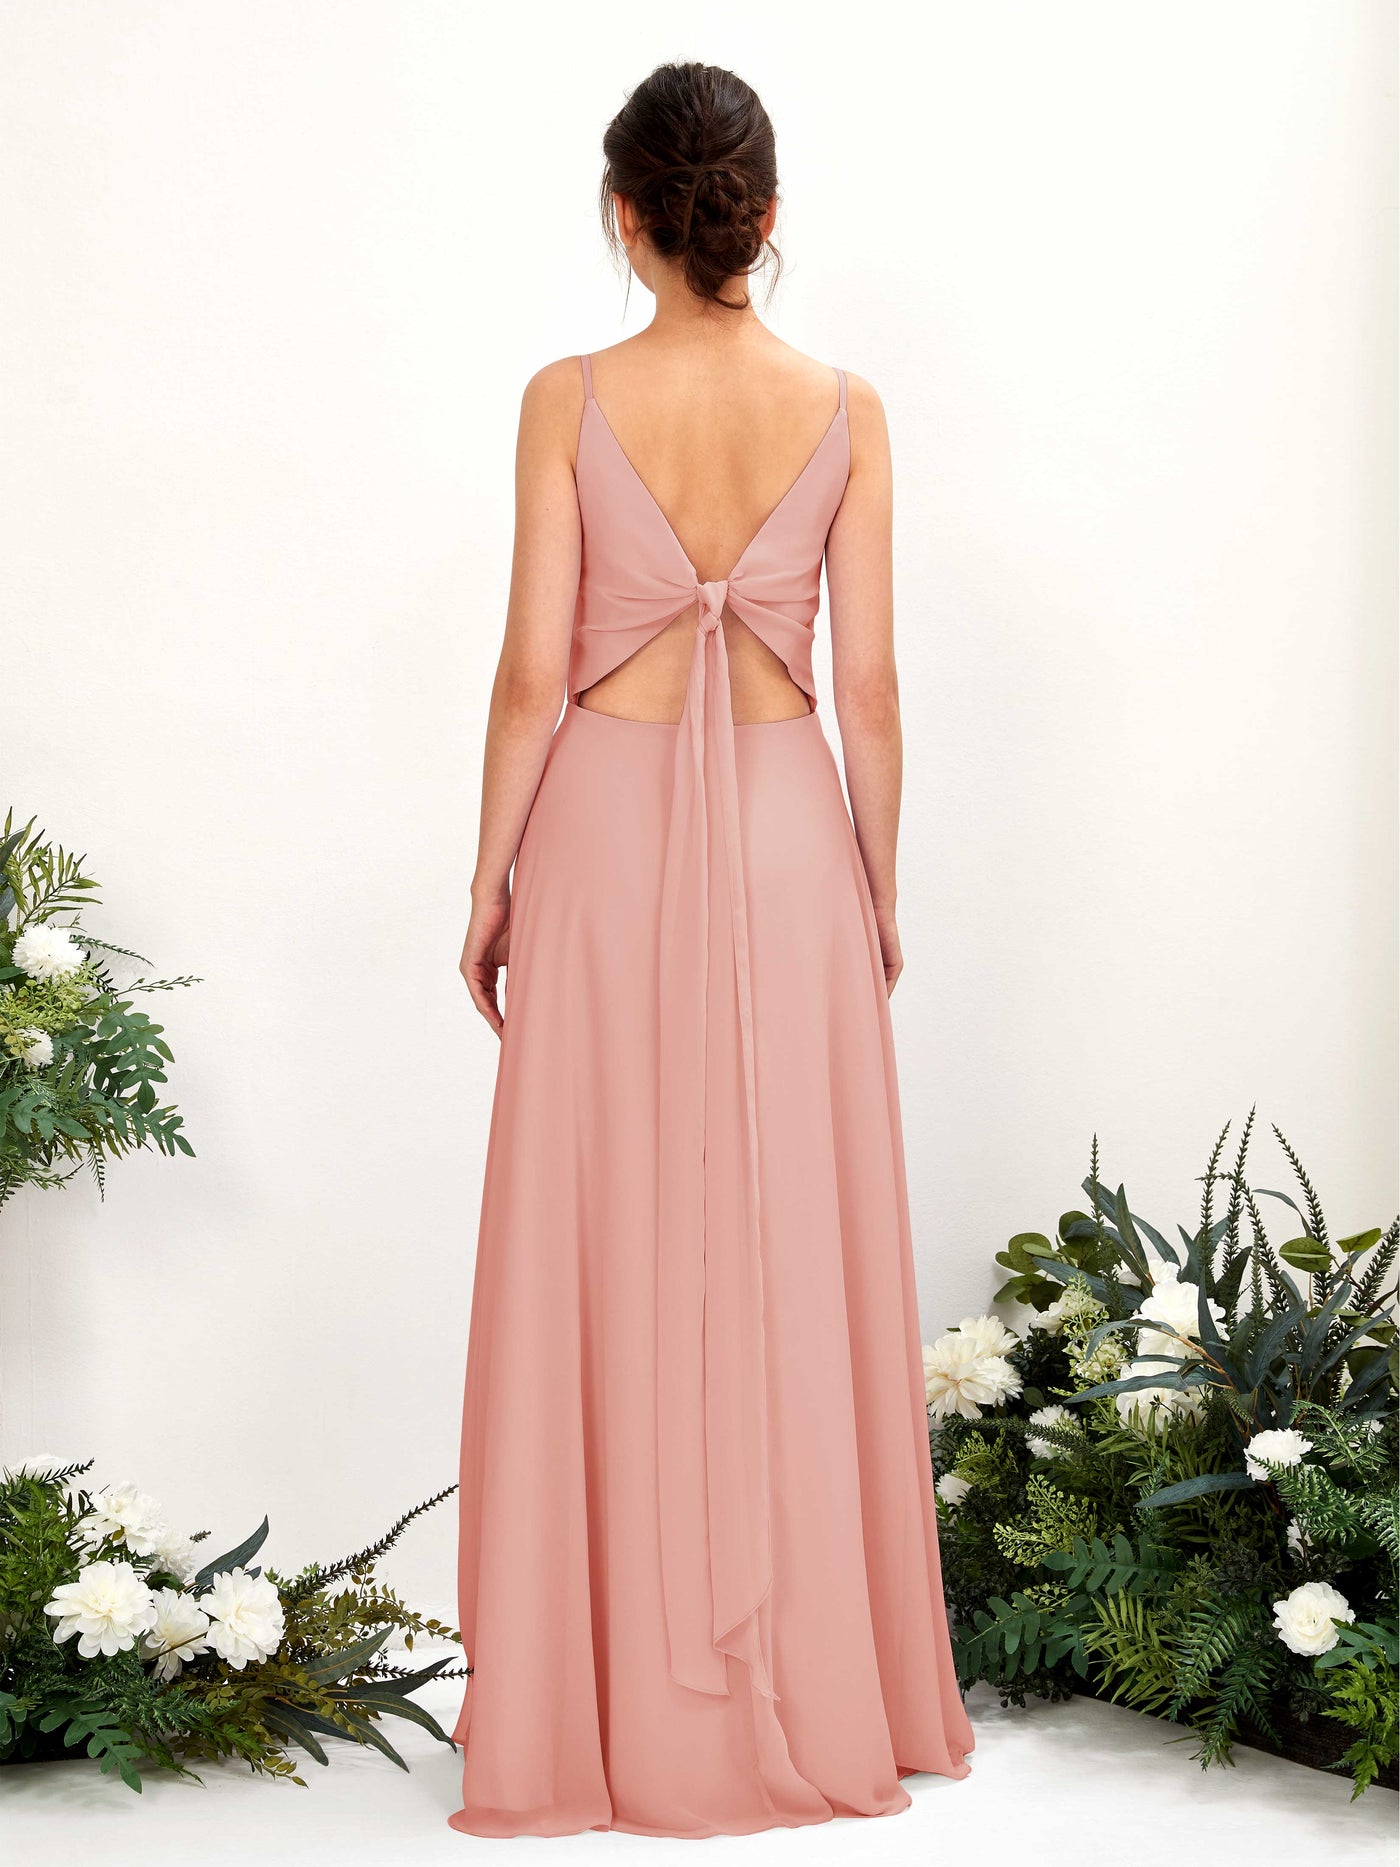 Champagne Rose Bridesmaid Dresses Bridesmaid Dress A-line Chiffon Spaghetti-straps Full Length Sleeveless Wedding Party Dress (81220606)#color_champagne-rose